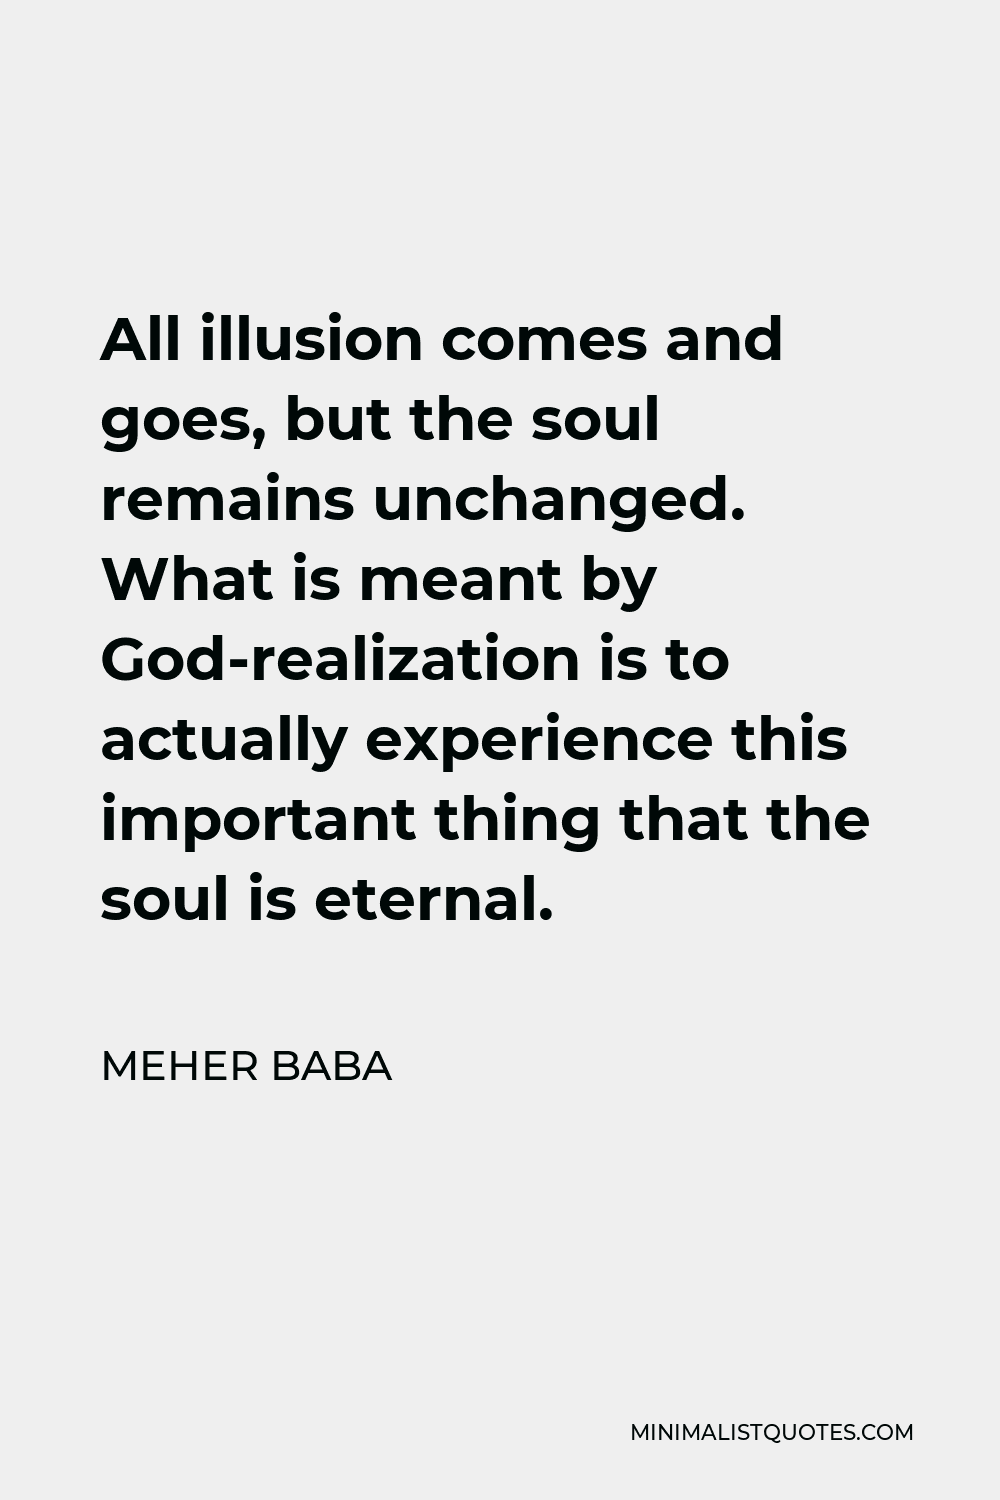 Meher Baba Quote - All illusion comes and goes, but the soul remains unchanged. What is meant by God-realization is to actually experience this important thing that the soul is eternal.